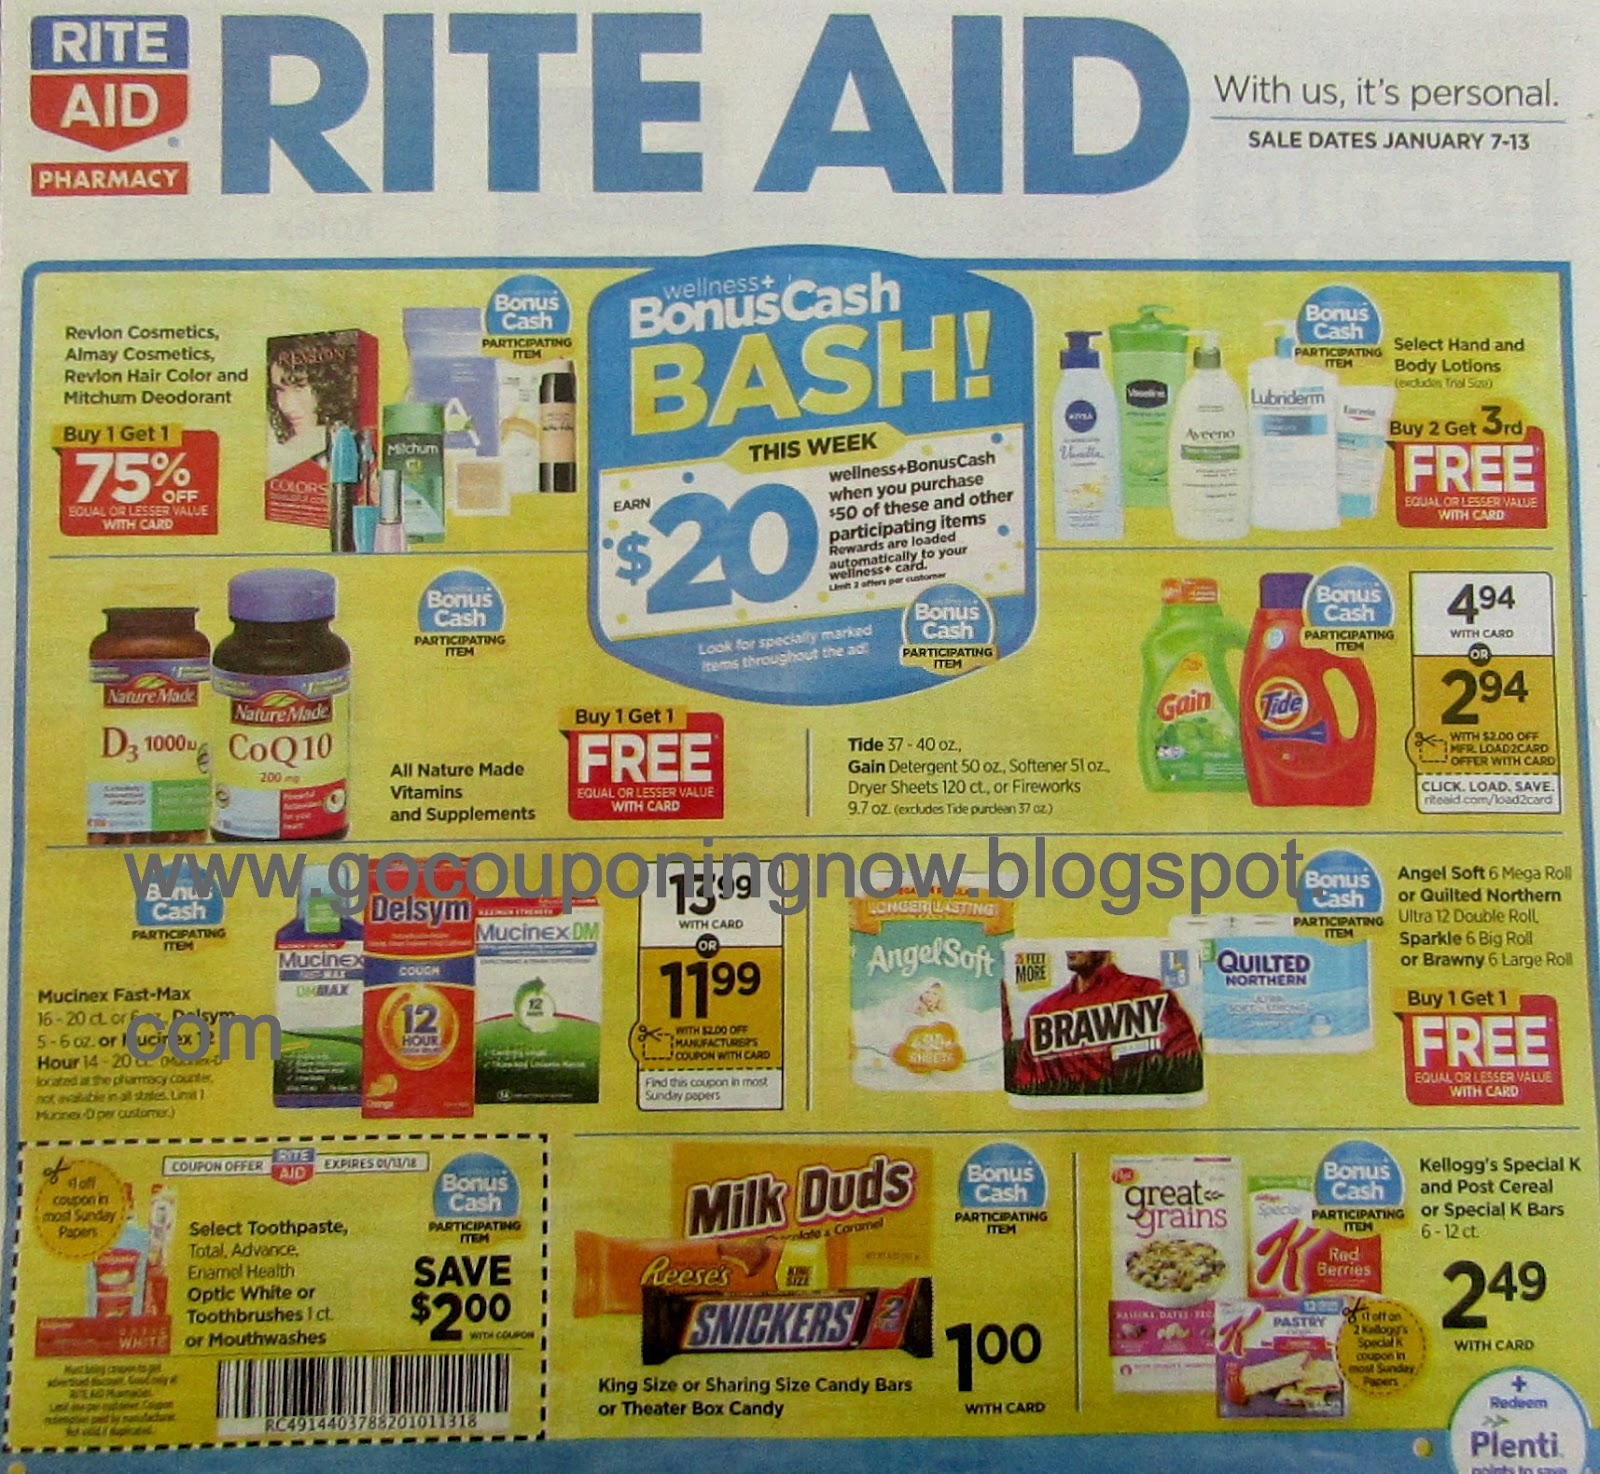 go-couponing-now-rite-aid-front-page-deals-1-7-18-1-13-18